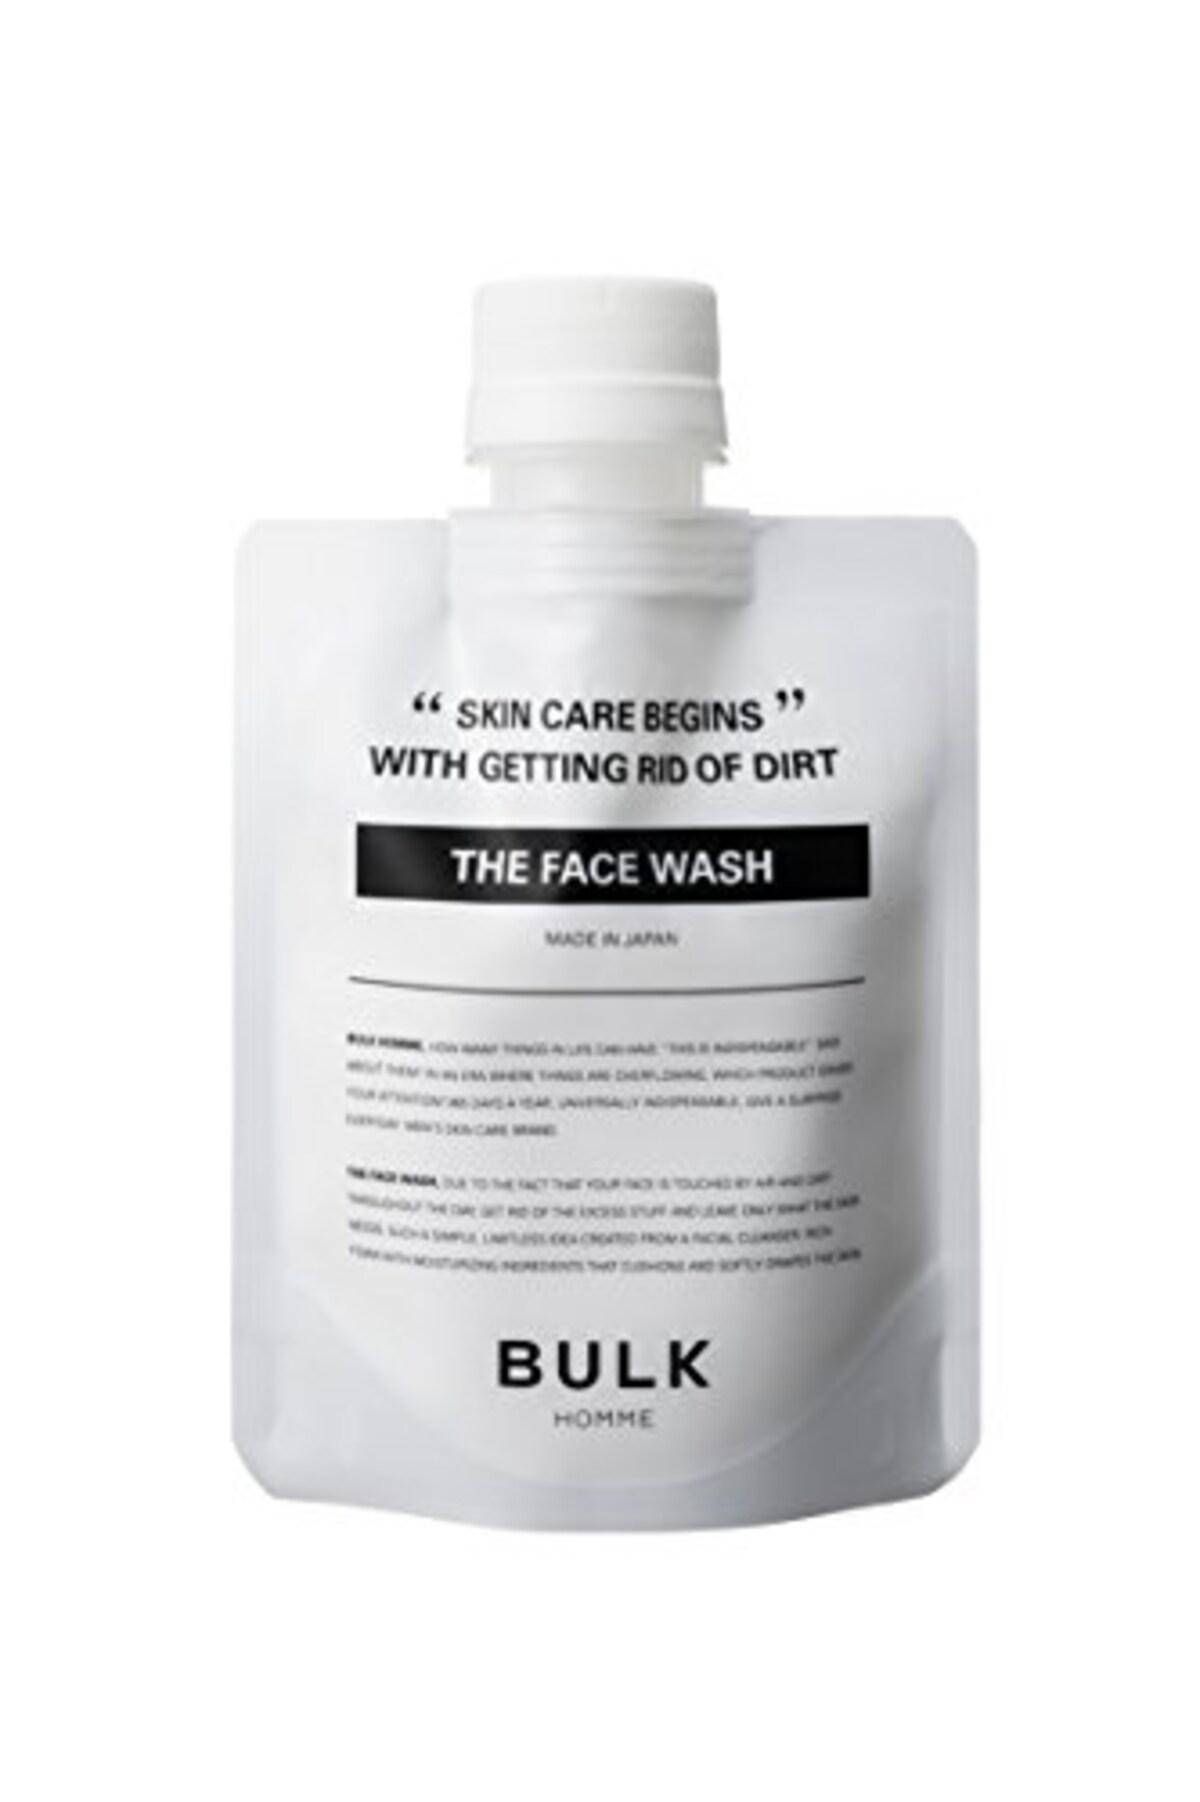 THE FACE WASH